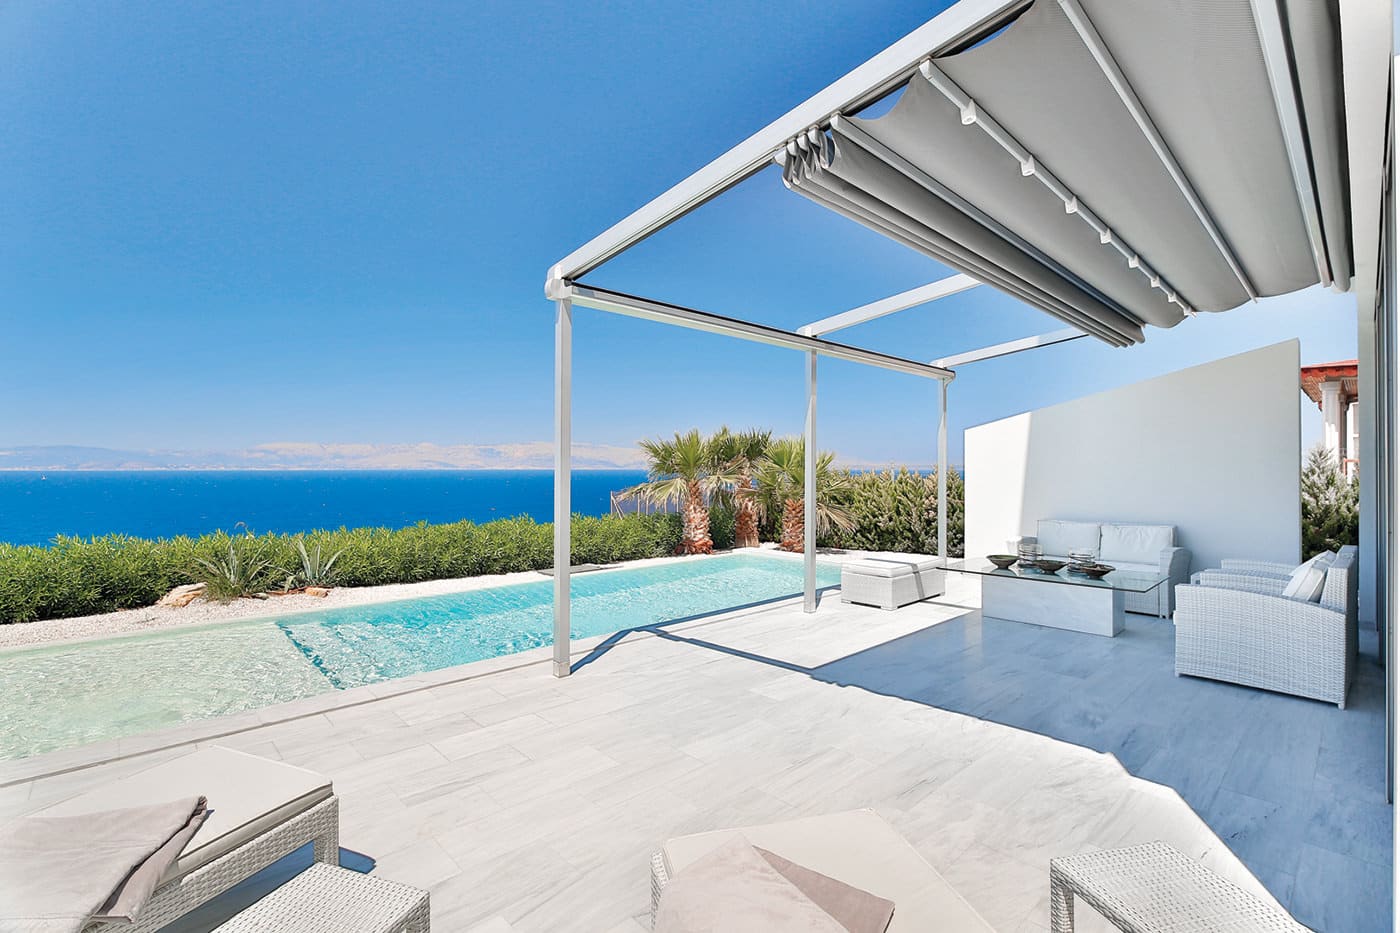 Home pool-side pergola with sea view featuring Palmiye Fabric Retractable Awnings by Luxaflex.